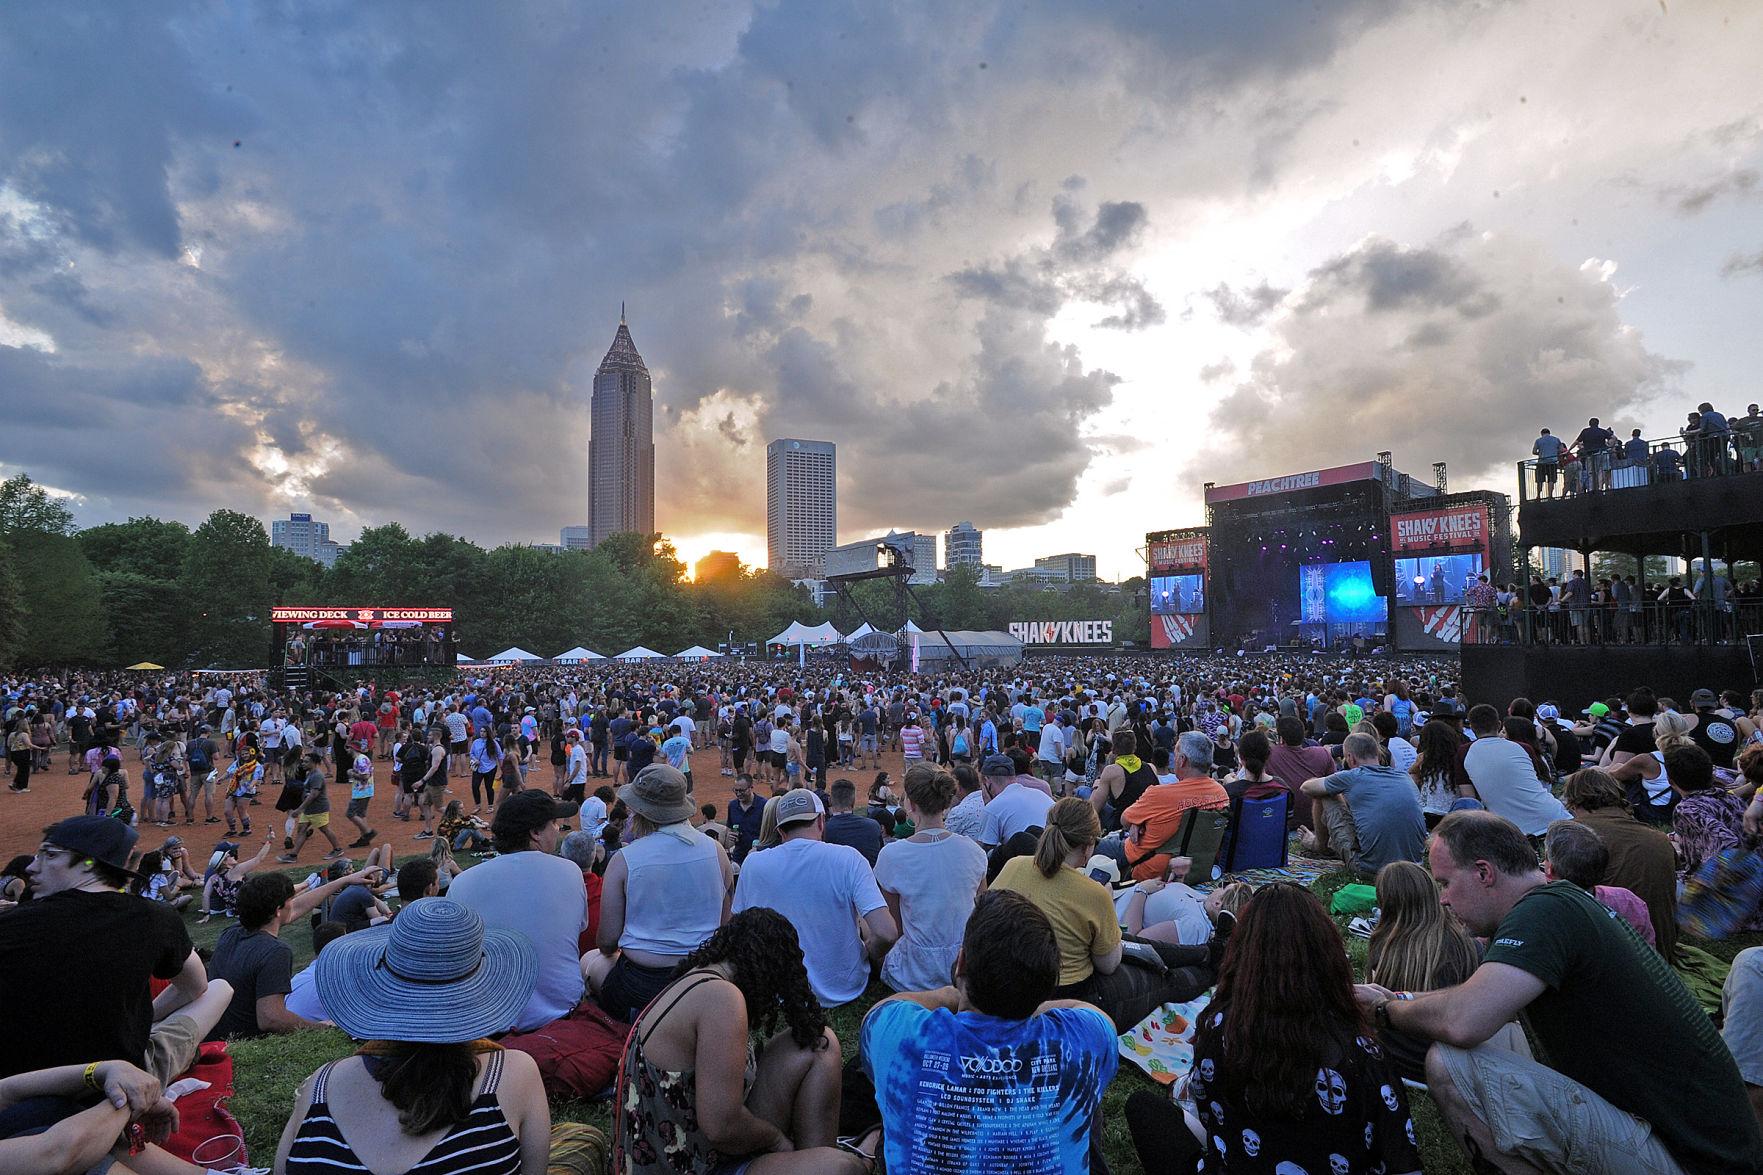 PHOTOS Thousands attend Shaky Knees Music Festival in Atlanta